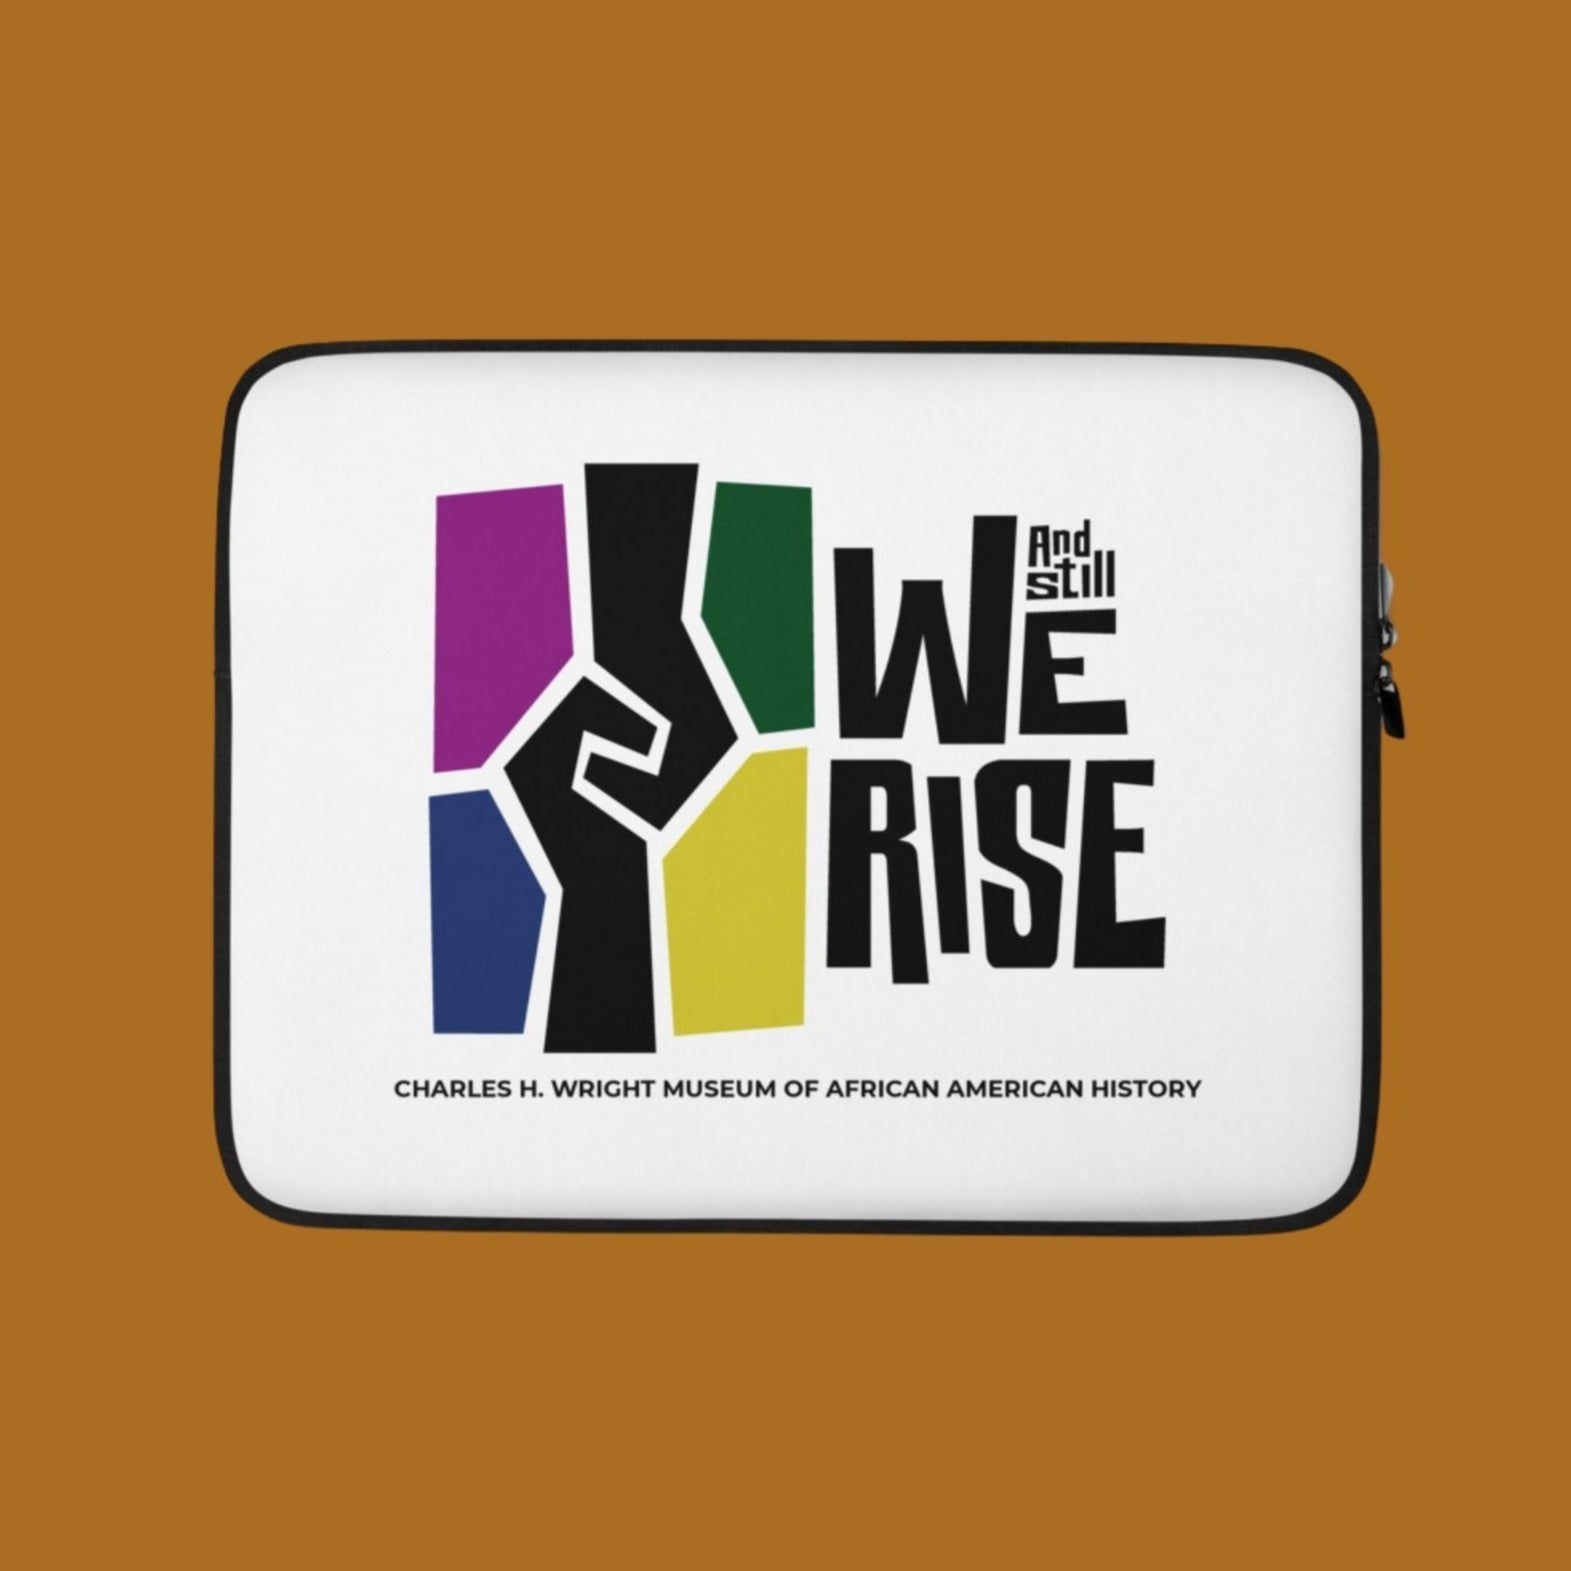 Computer laptop protective sleeve with the And Still We Rise exhibition logo on front